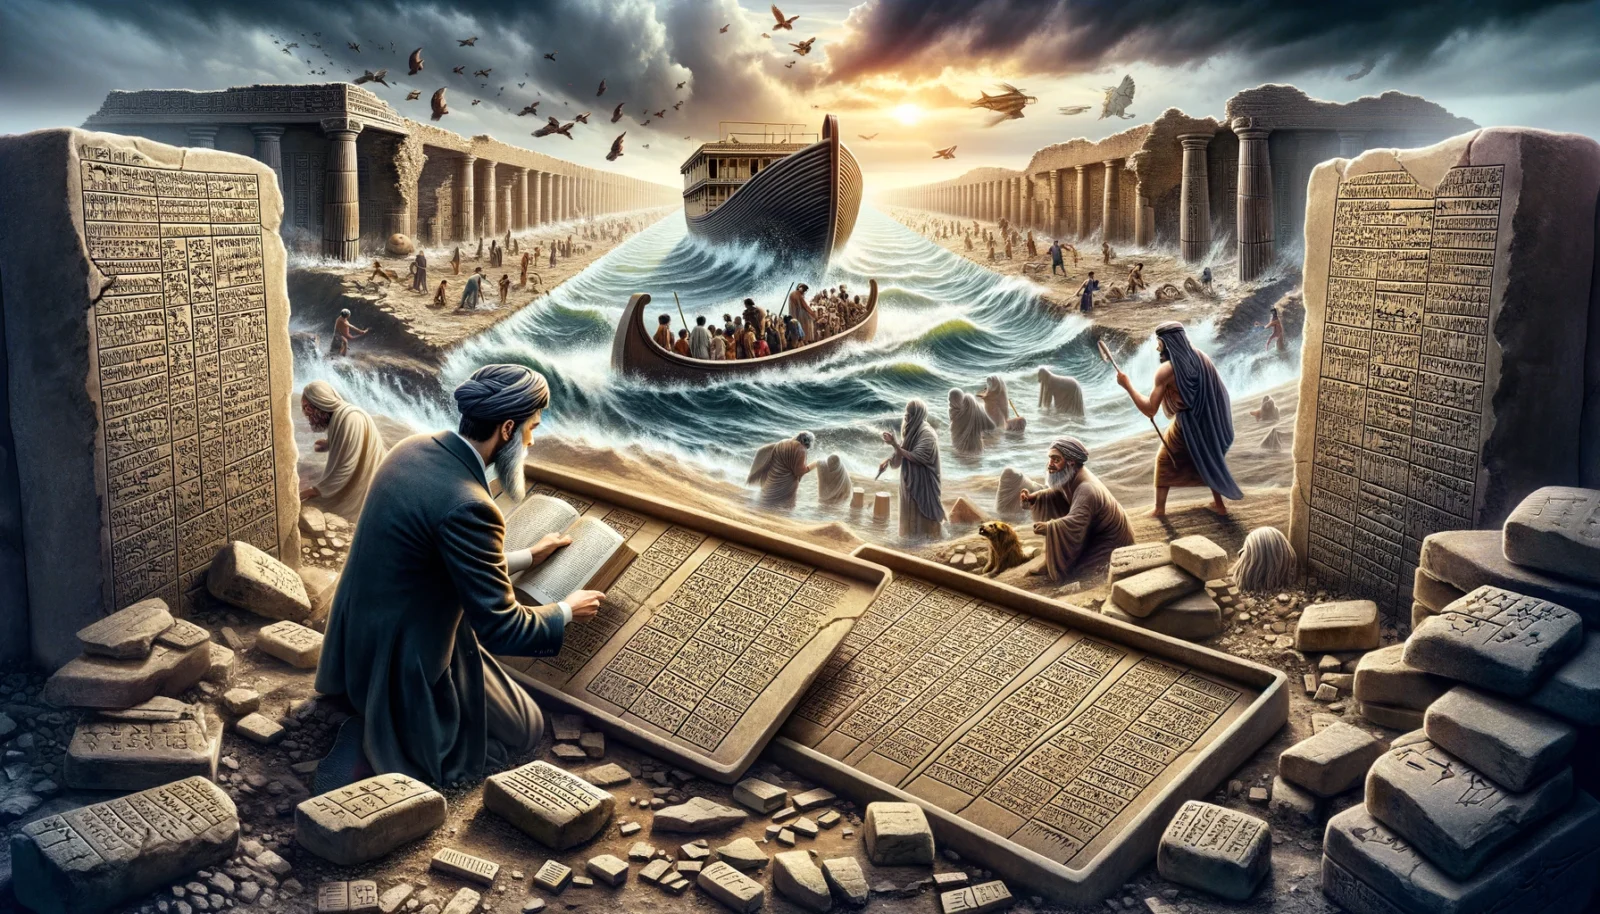 Discovery: The Sumerian Flood Story